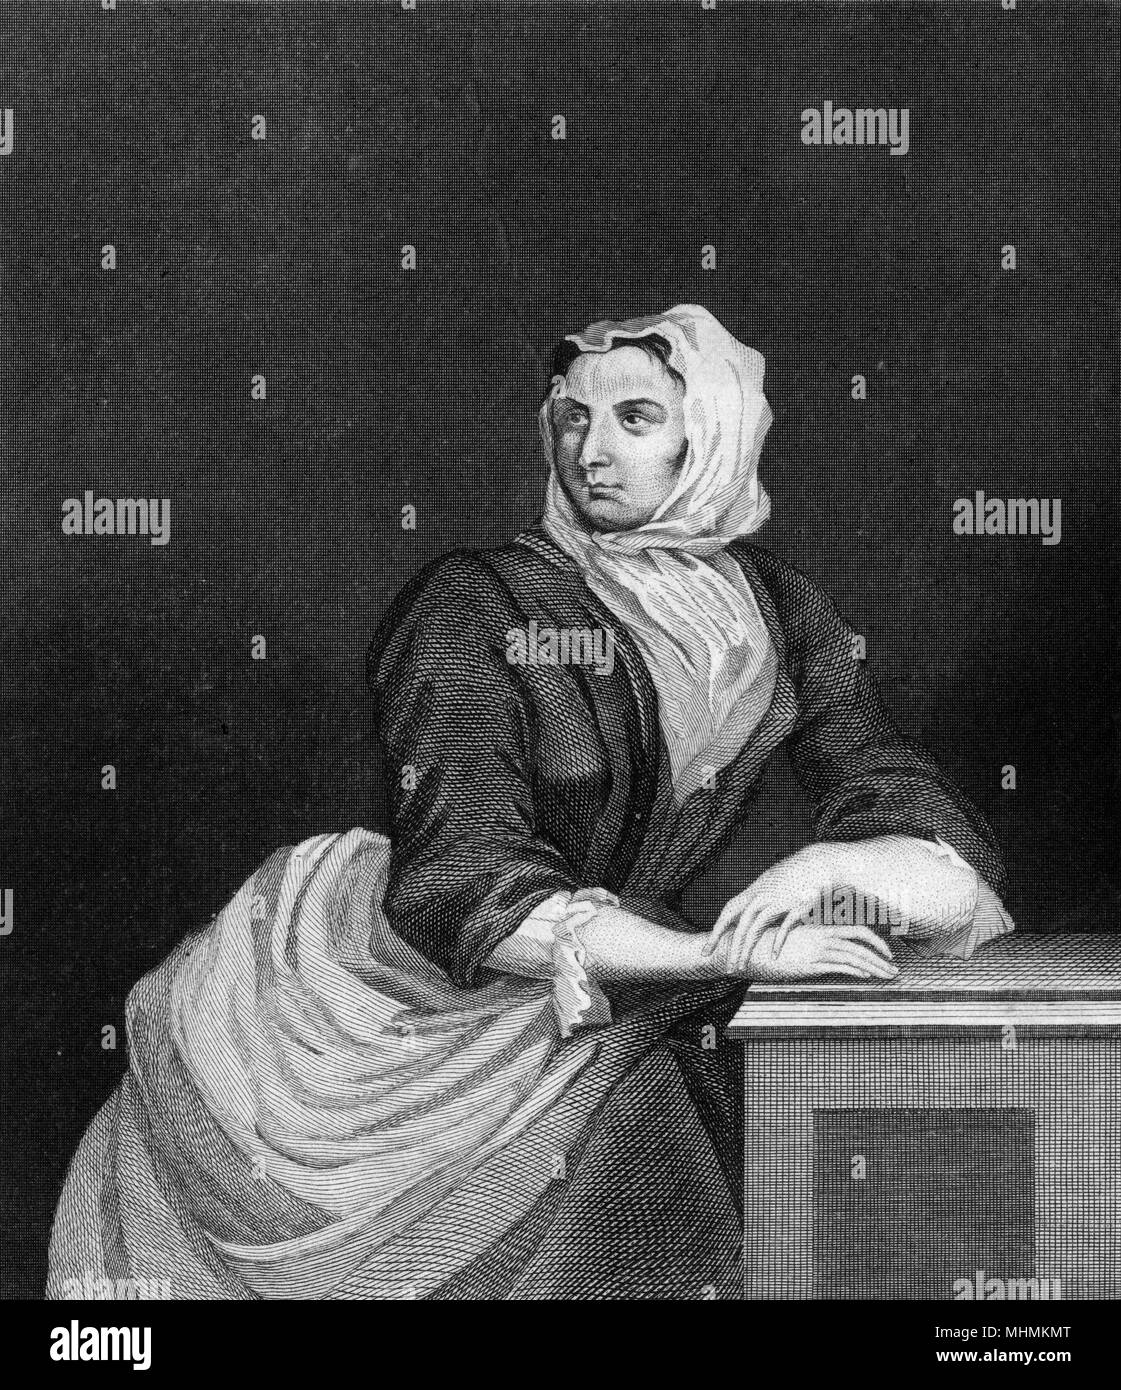 Sarah Malcom, who was hanged for the robbery &amp; vicious murder of three women; the crimes gained her tremendous notoriety      Date: 1711 - 1733 Stock Photo